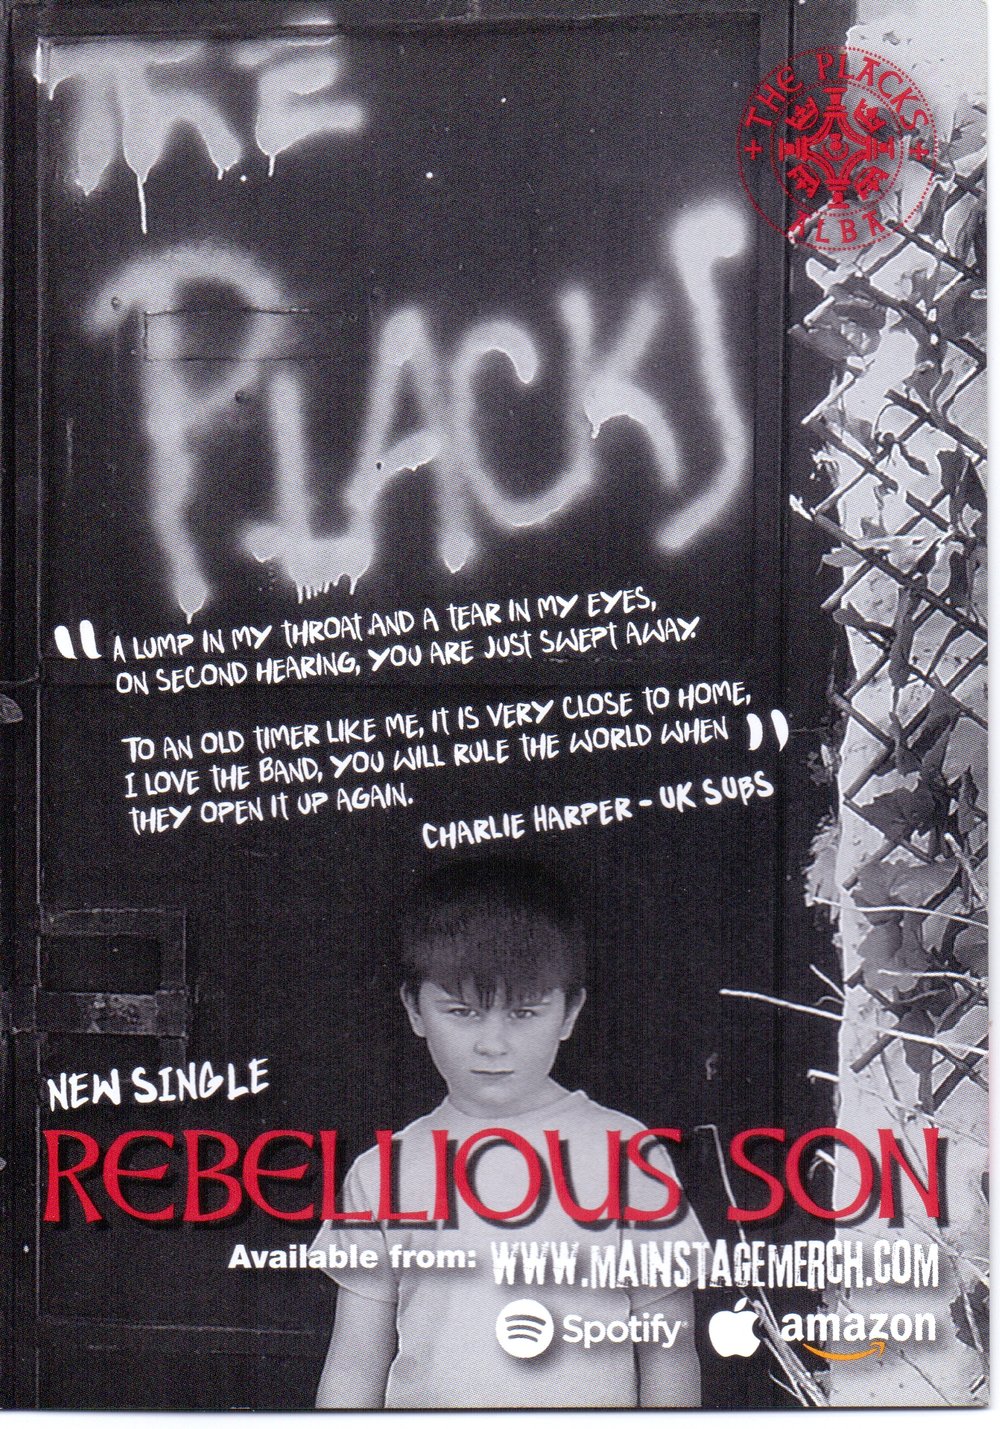 The Placks - 7" - Rebellious Son - Red vinyl single (RECOMMENDED BY CHARLIE) MONIES TO NHS CHARITY